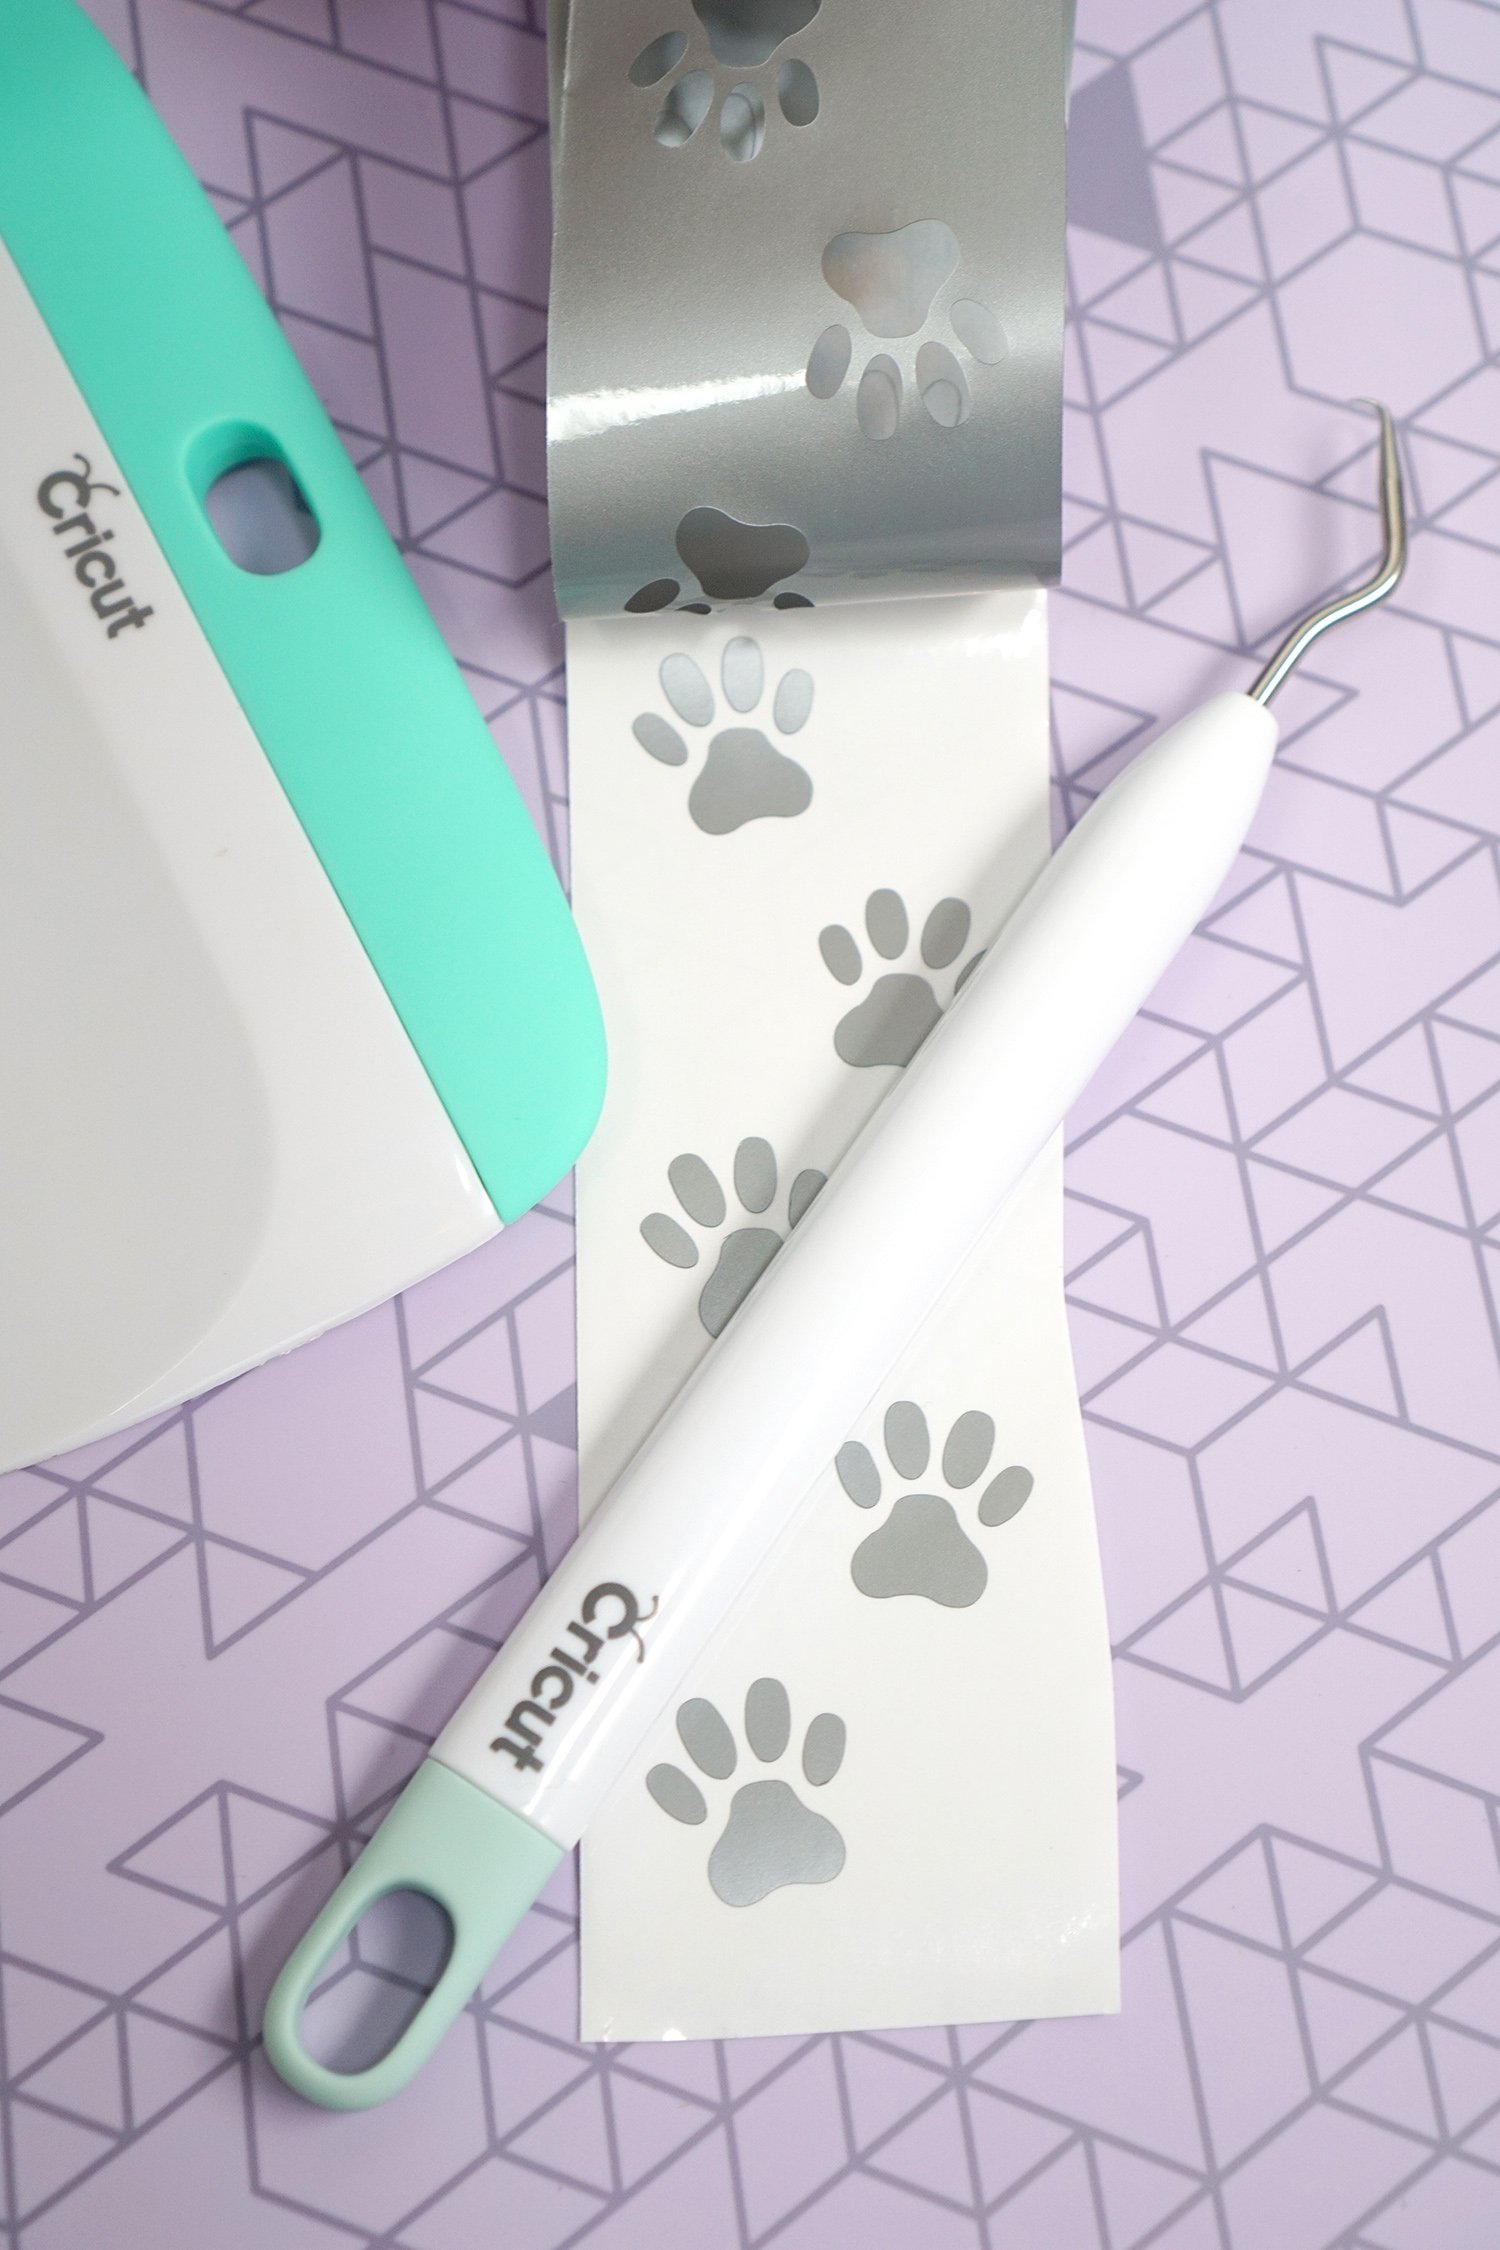 silver adhesive vinyl with paw prints and cricut tools